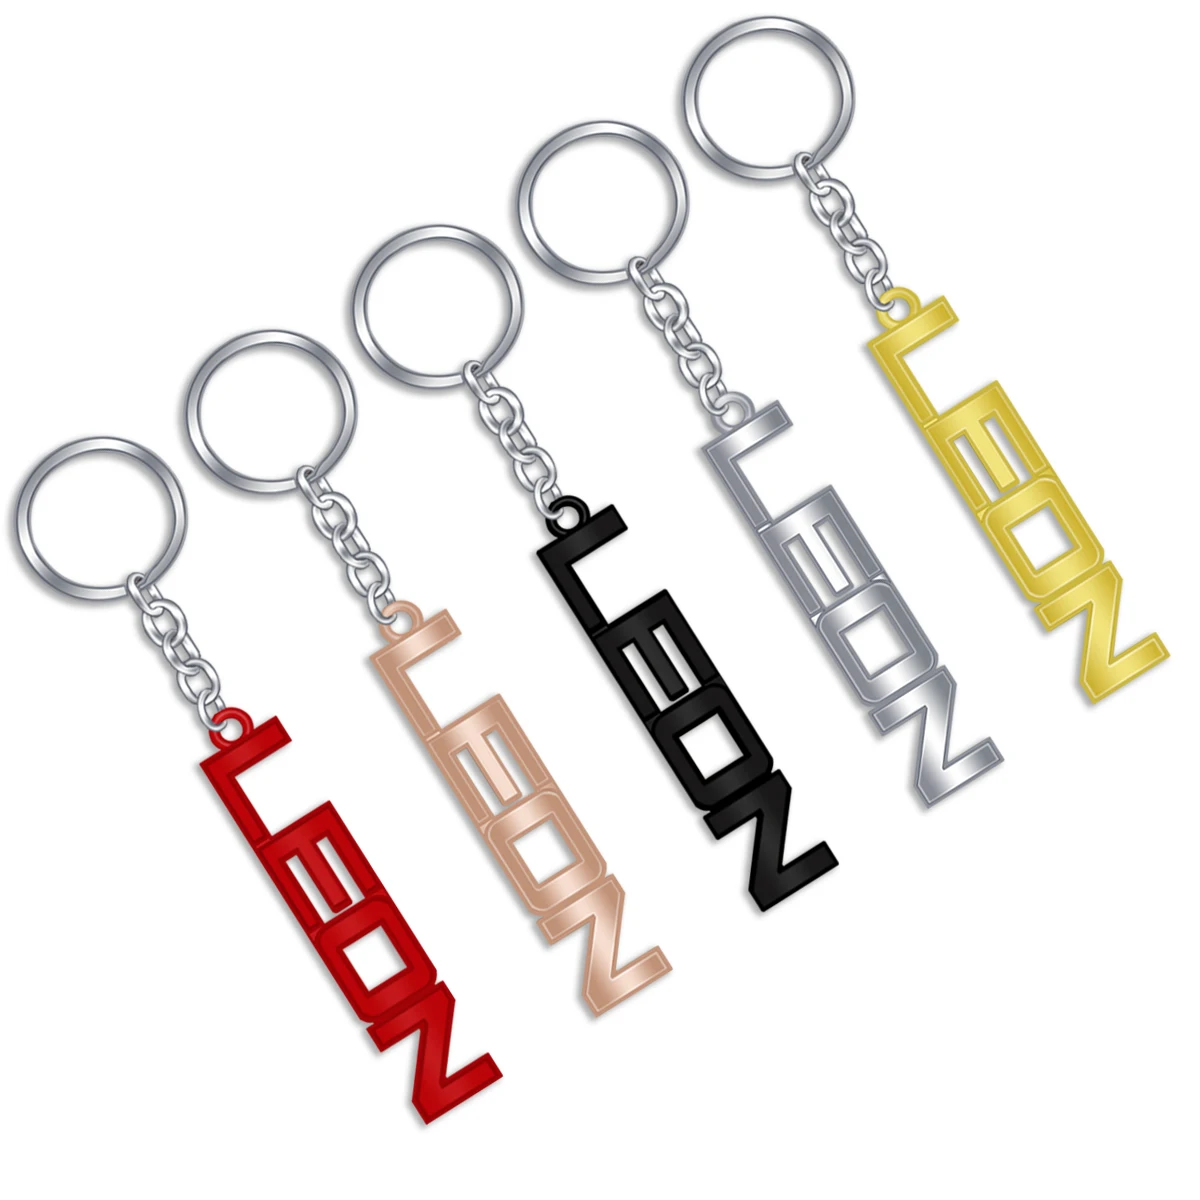 

For Seat LEON Emblem Car Keychain Badge Keyring Metal Key Chain Ring Holder Accessories